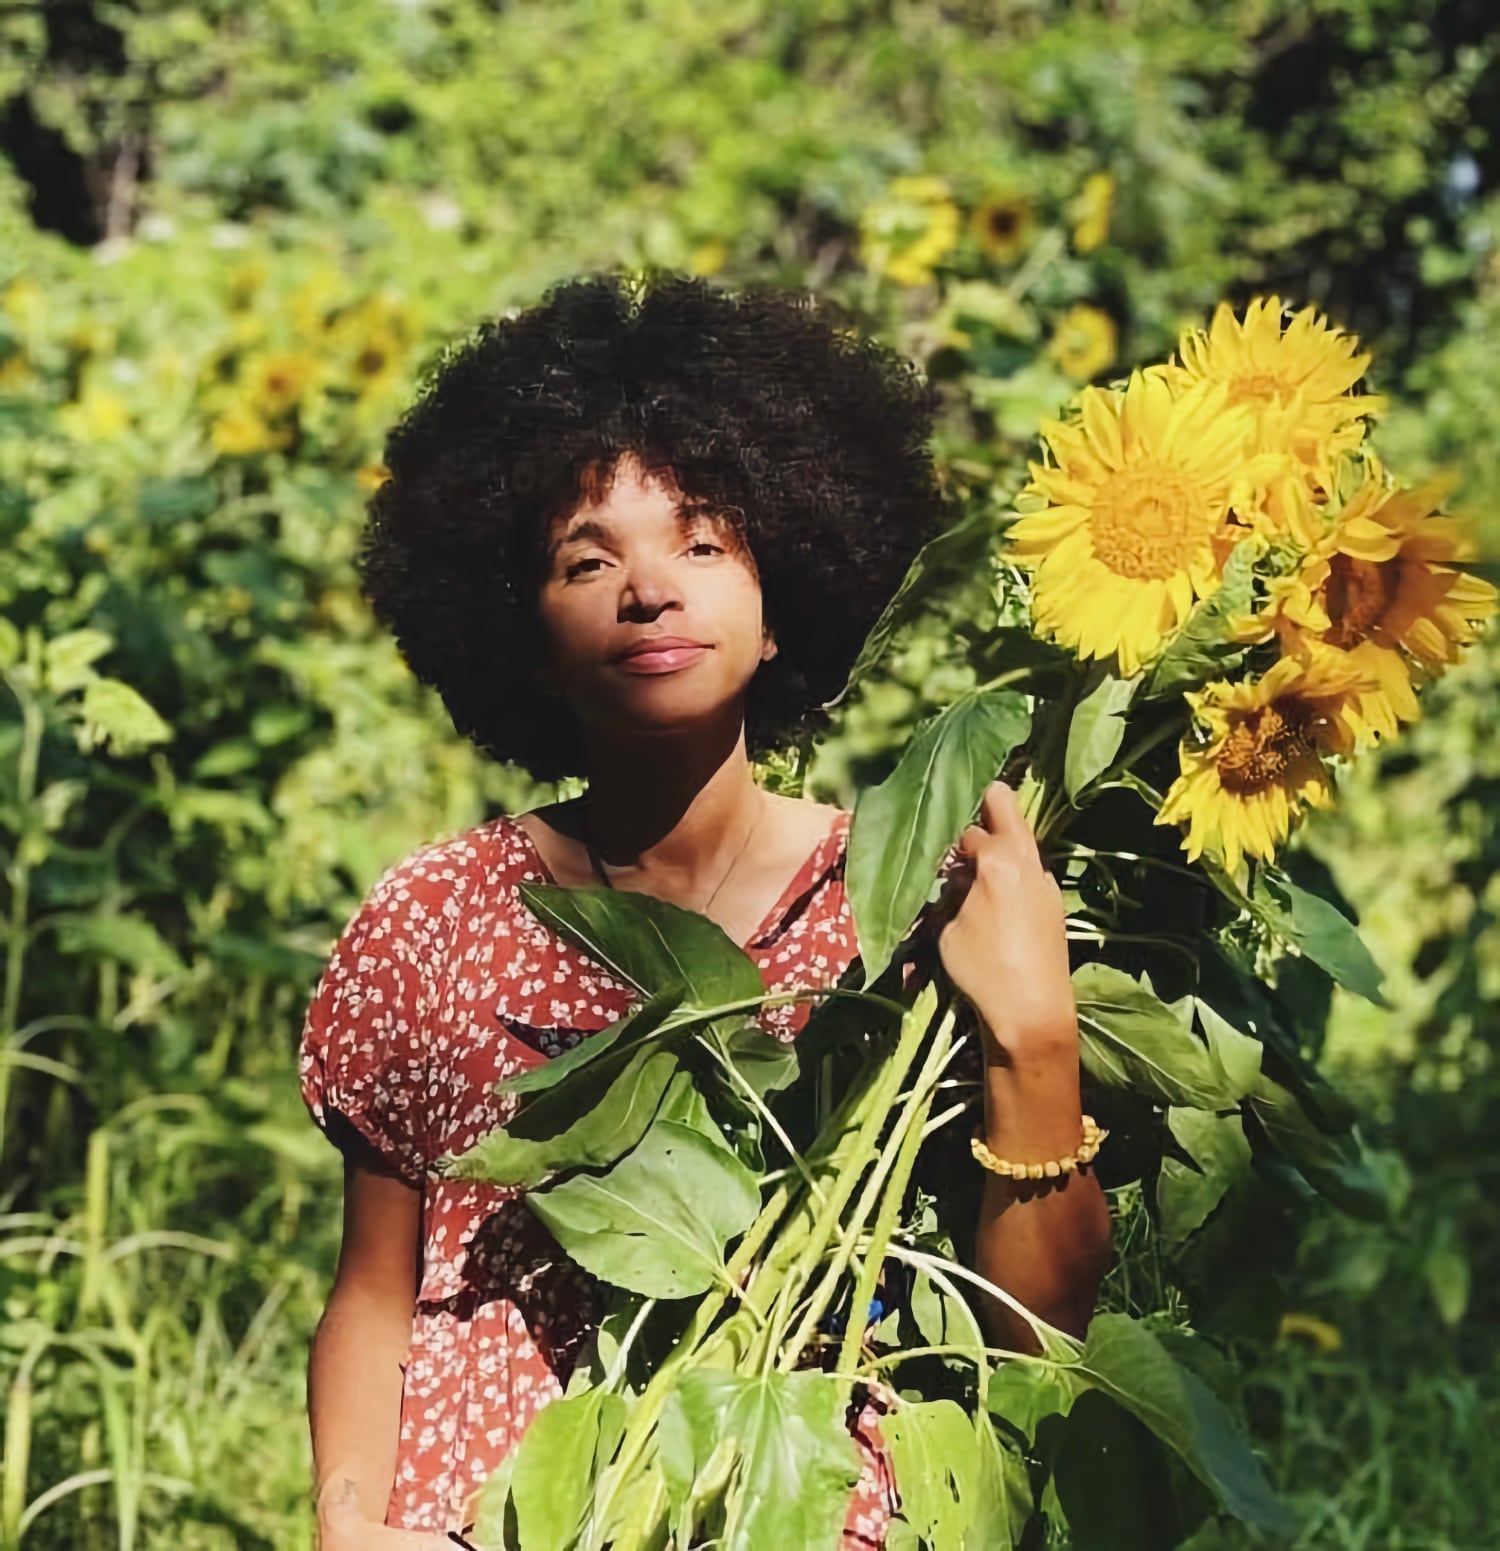 Taylor Teachout, a young Black person, stands in front of green foliage holding a large sunflower.